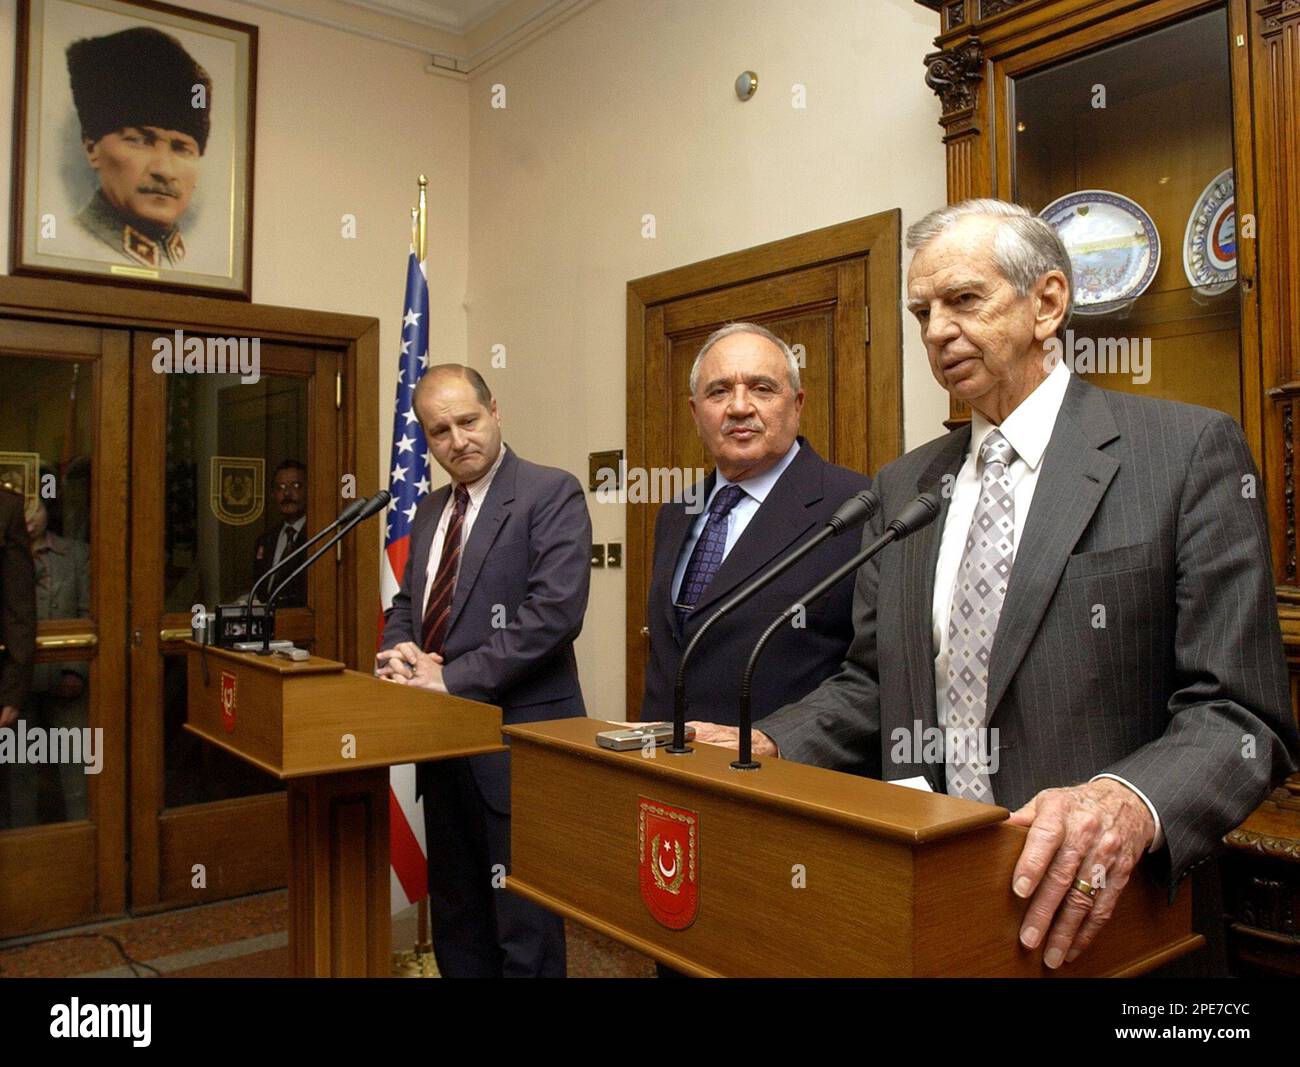 Turkey's Defense Minister Vecdi Gonul is flanked by U.S. ambassador to Turkey Eric Edelman, left, and Jerry R. Jones of Lockheed Martin Global, Inc., after their meeting in Gonul's office in Ankara on Tuesday, April 26, 2005. They announced that the U.S. and Turkey have come to a US$1.1 billion (euro 850 million) agreement to upgrade Turkey's fleet of 217 F-16 warplanes. (AP Photo/Burhan Ozbilici) Stock Photo